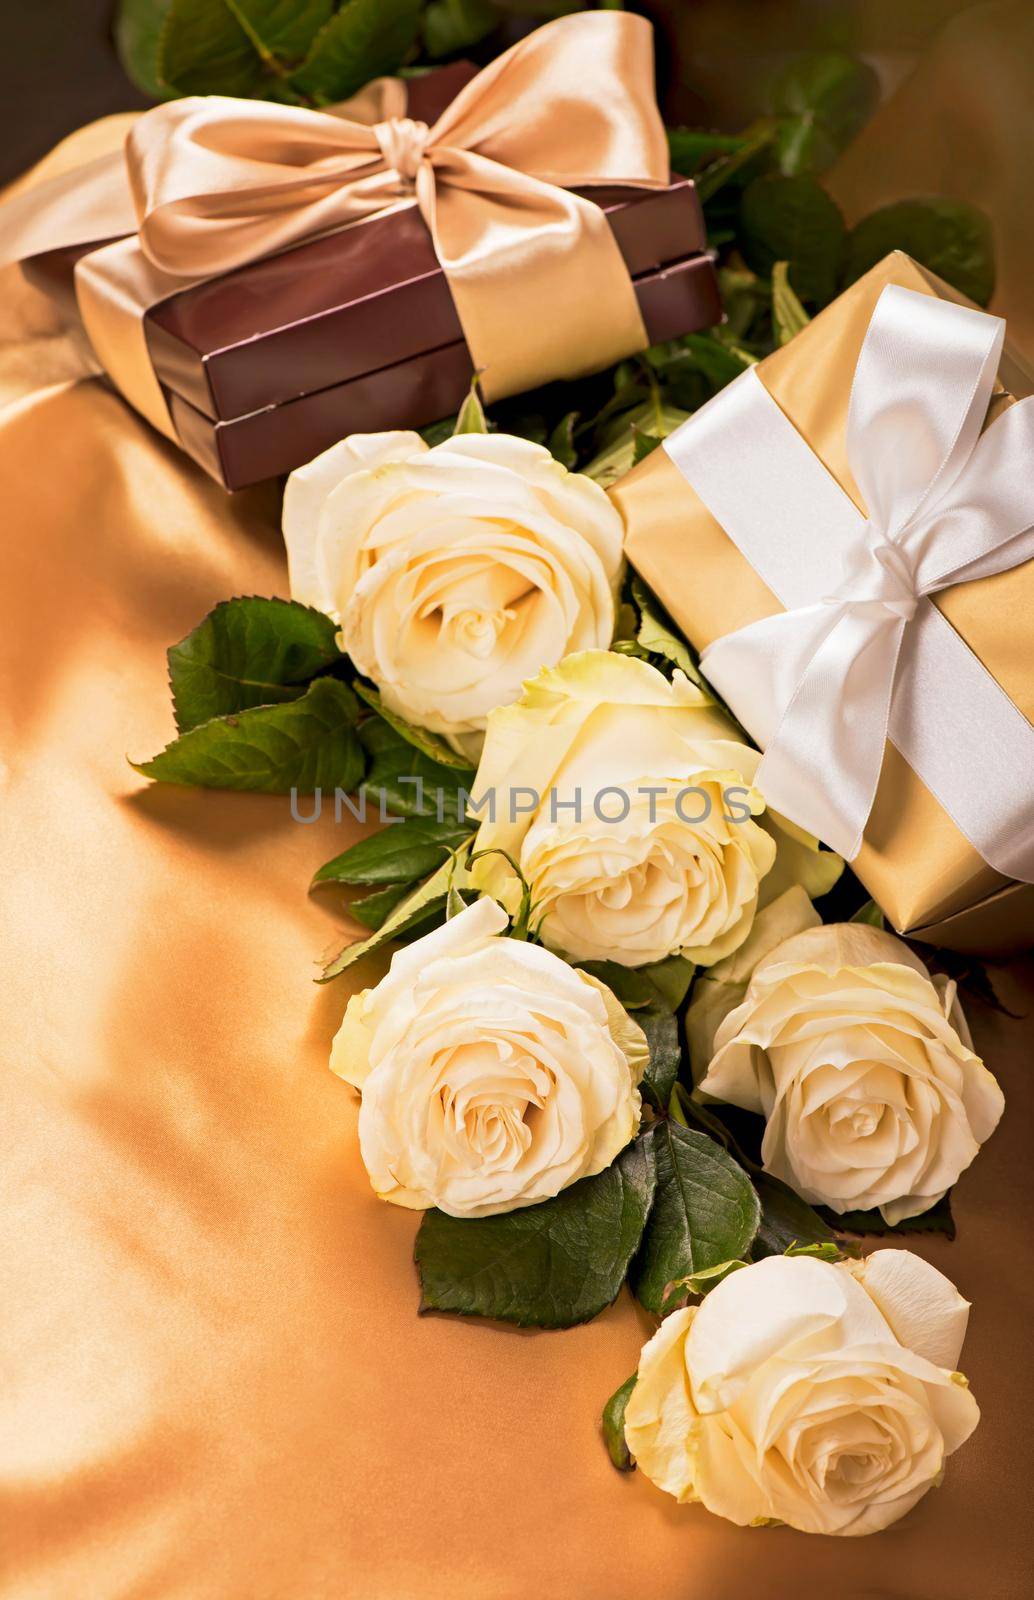 flowers and gift. white roses on golden silk background by aprilphoto